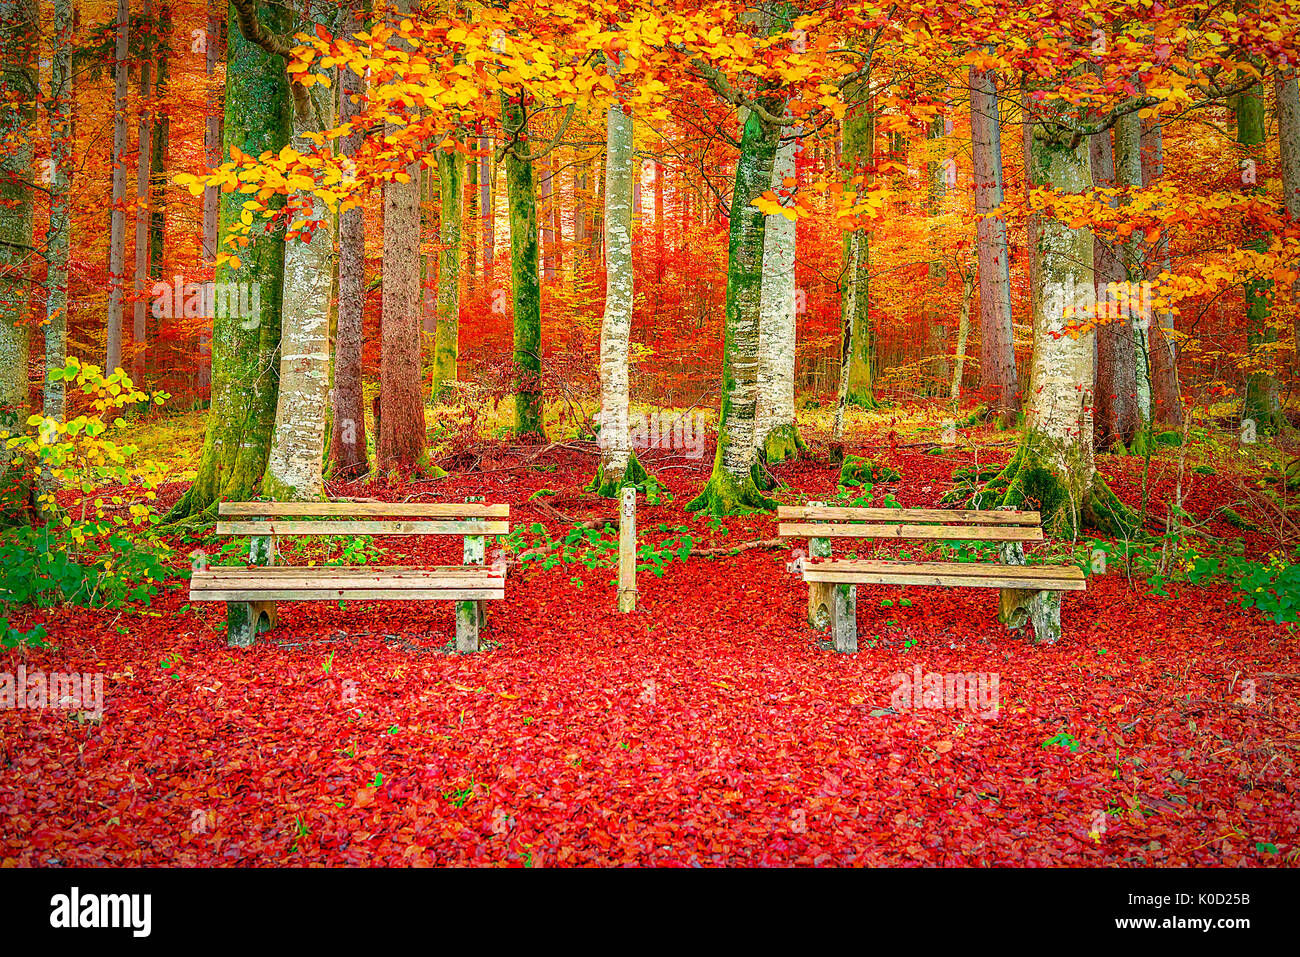 Beautiful fall landscape with a perfect place to relax, two wooden benches surrounded by the autumn decor, fallen leaves, and colorful trees. Stock Photo